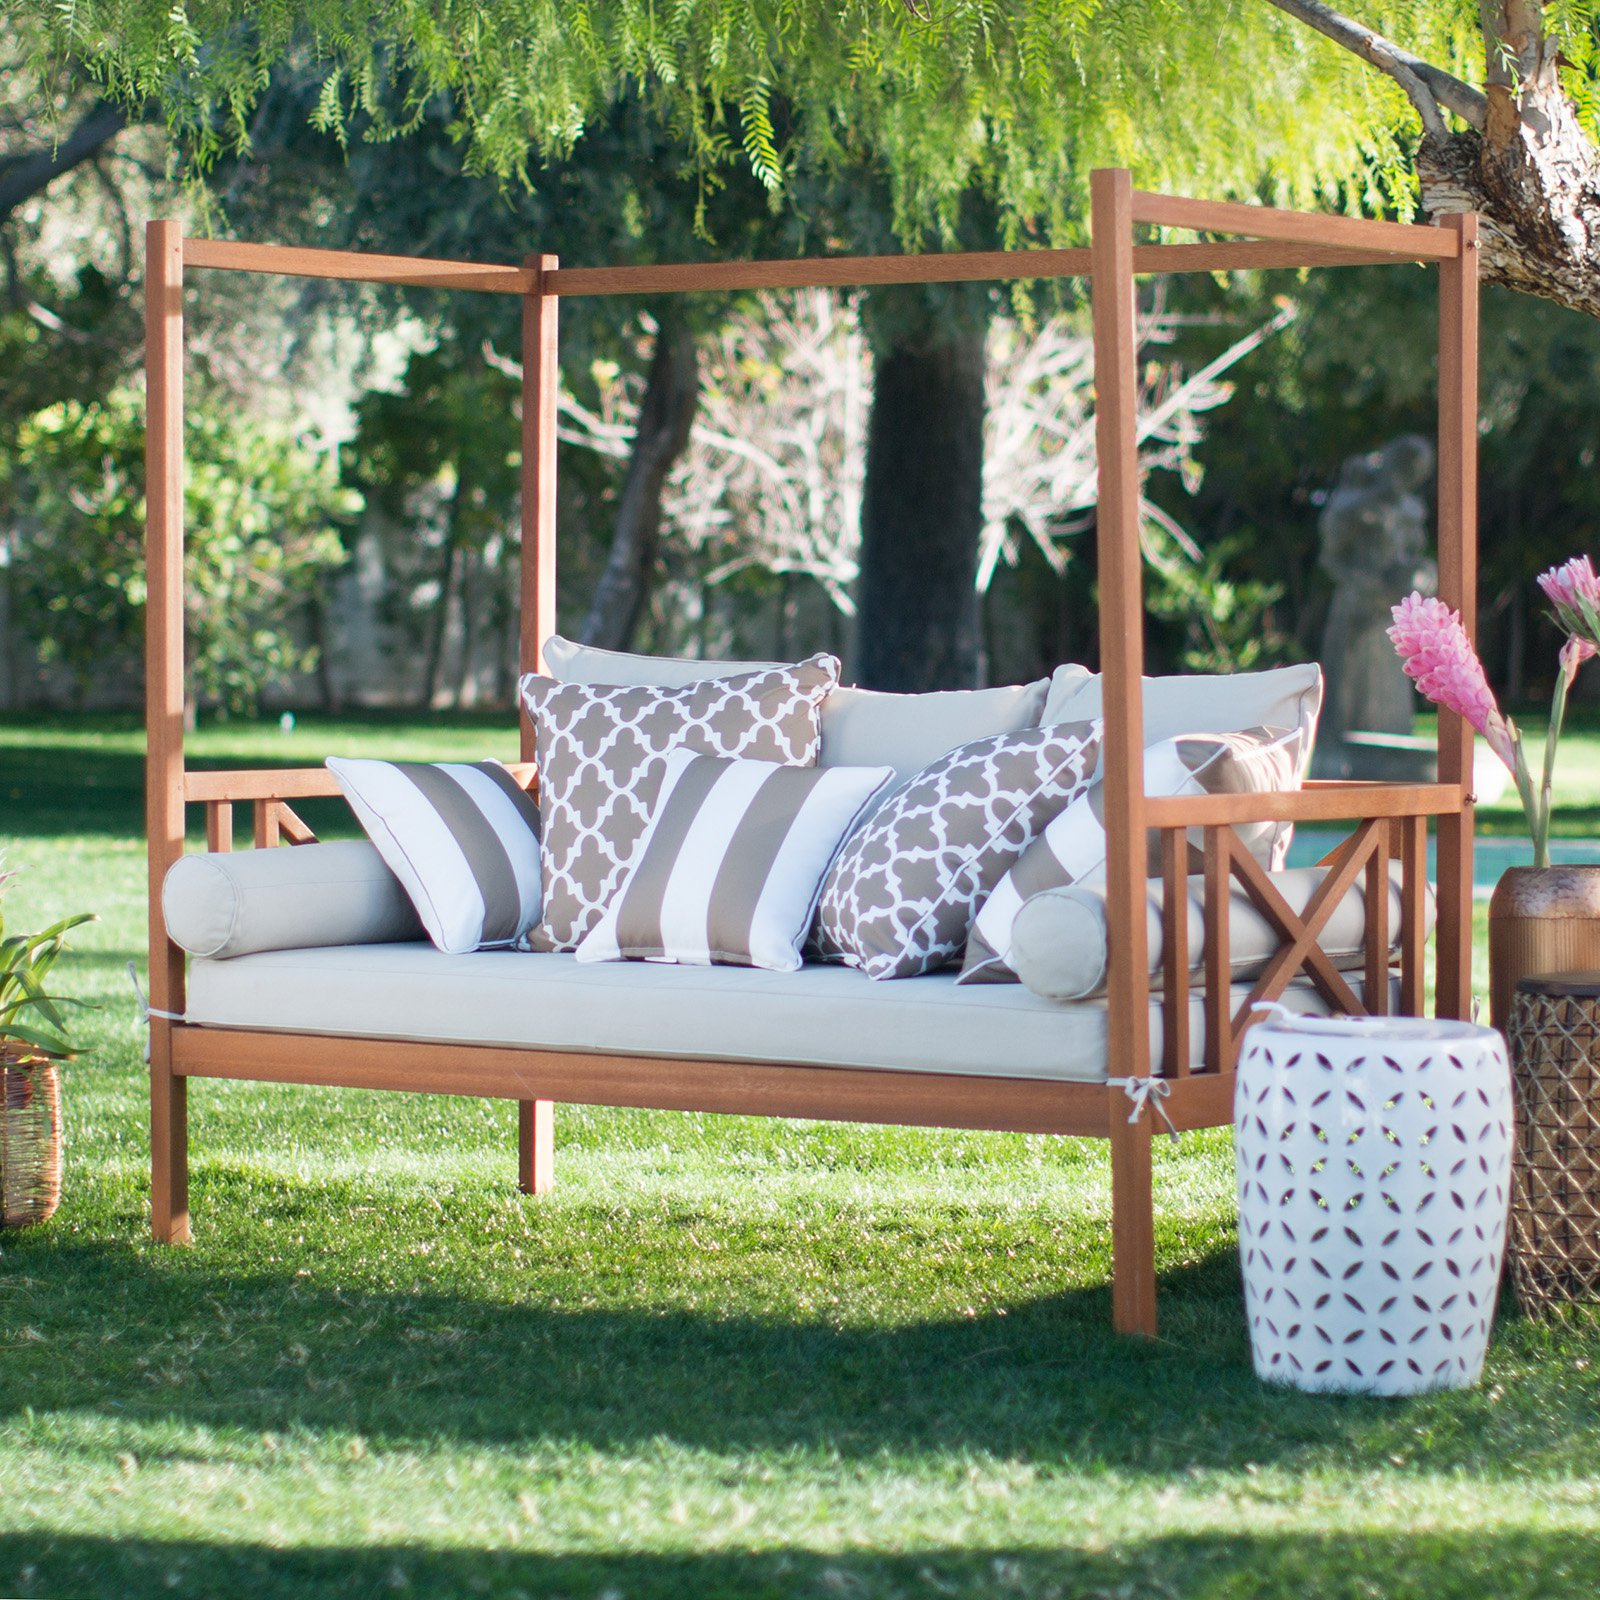 belham living brighton outdoor daybed and ottoman - natural - outdoor  daybeds QPJRAVE